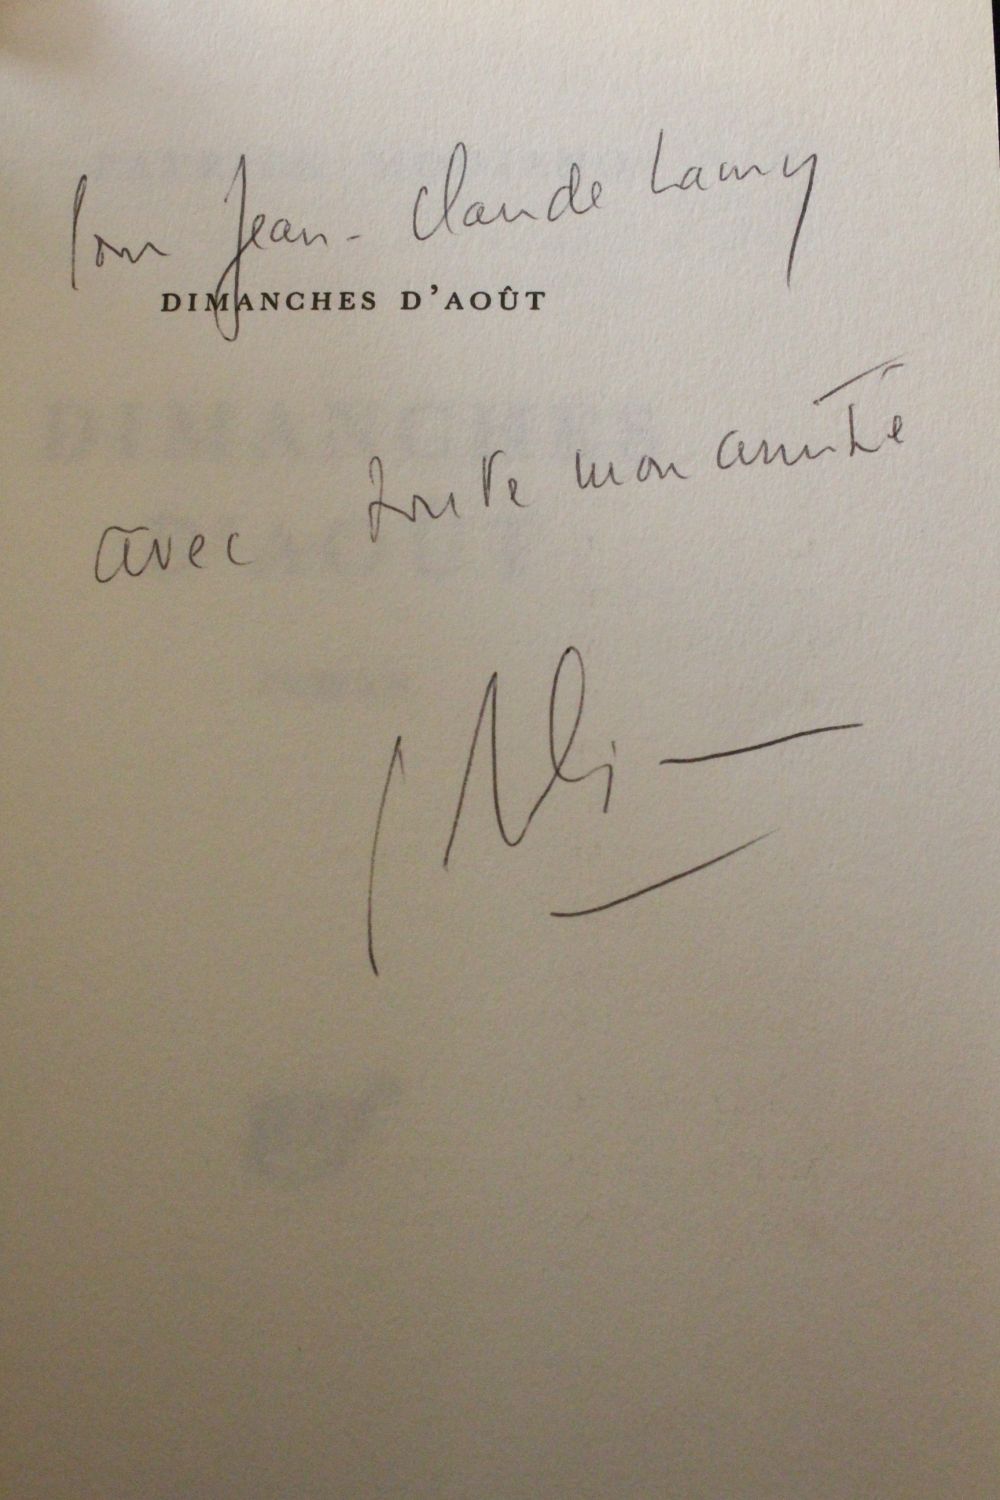 MODIANO : Dimanches d'août - Signed book, First edition - Edition ...